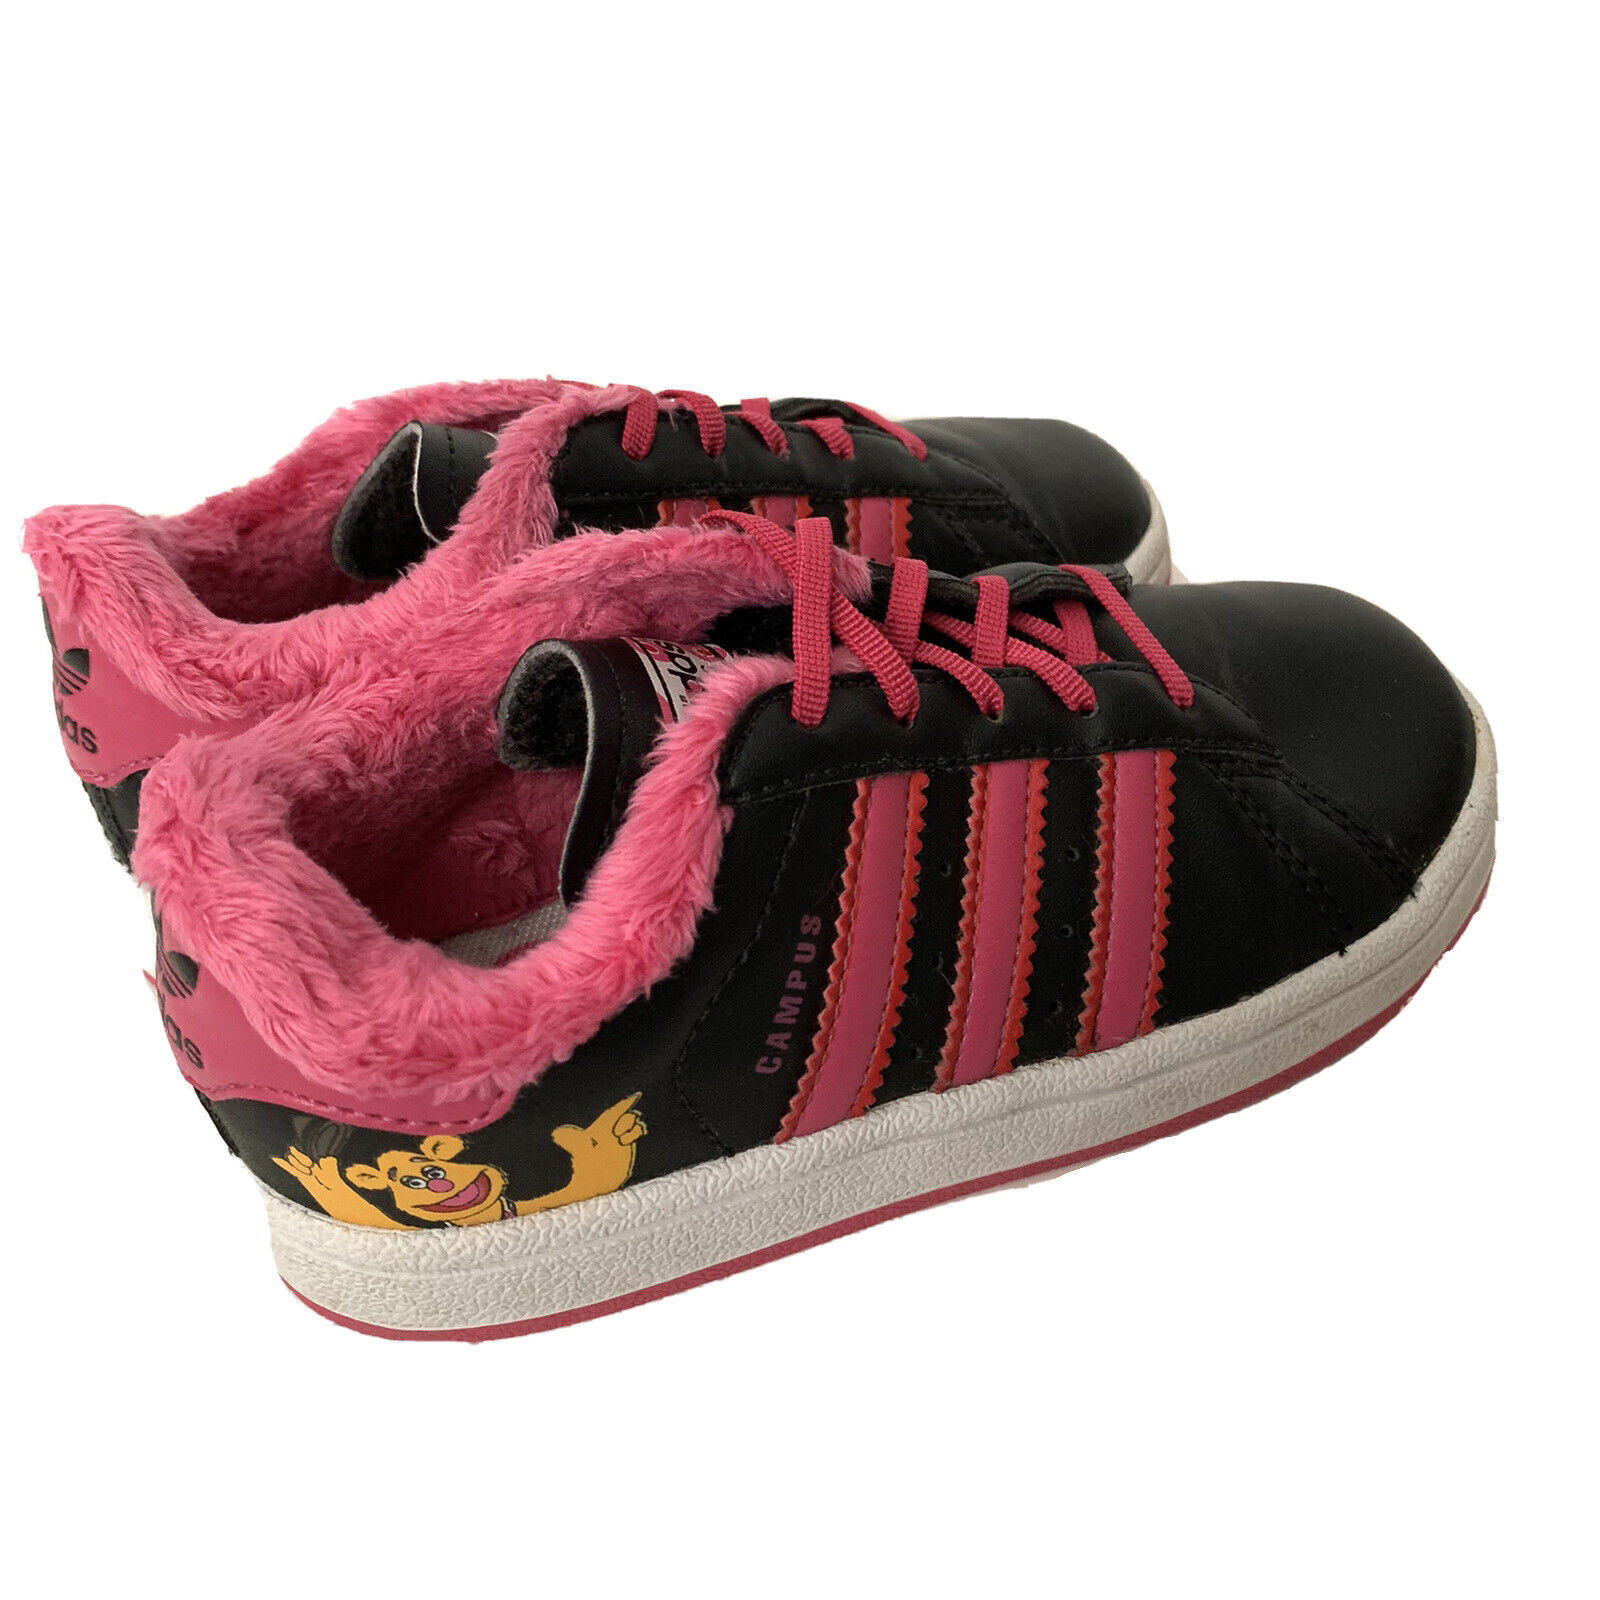 Adidas Campus Muppets Fozzie Bear Leather Exclusive Sneakers 9 Little Kids 2011